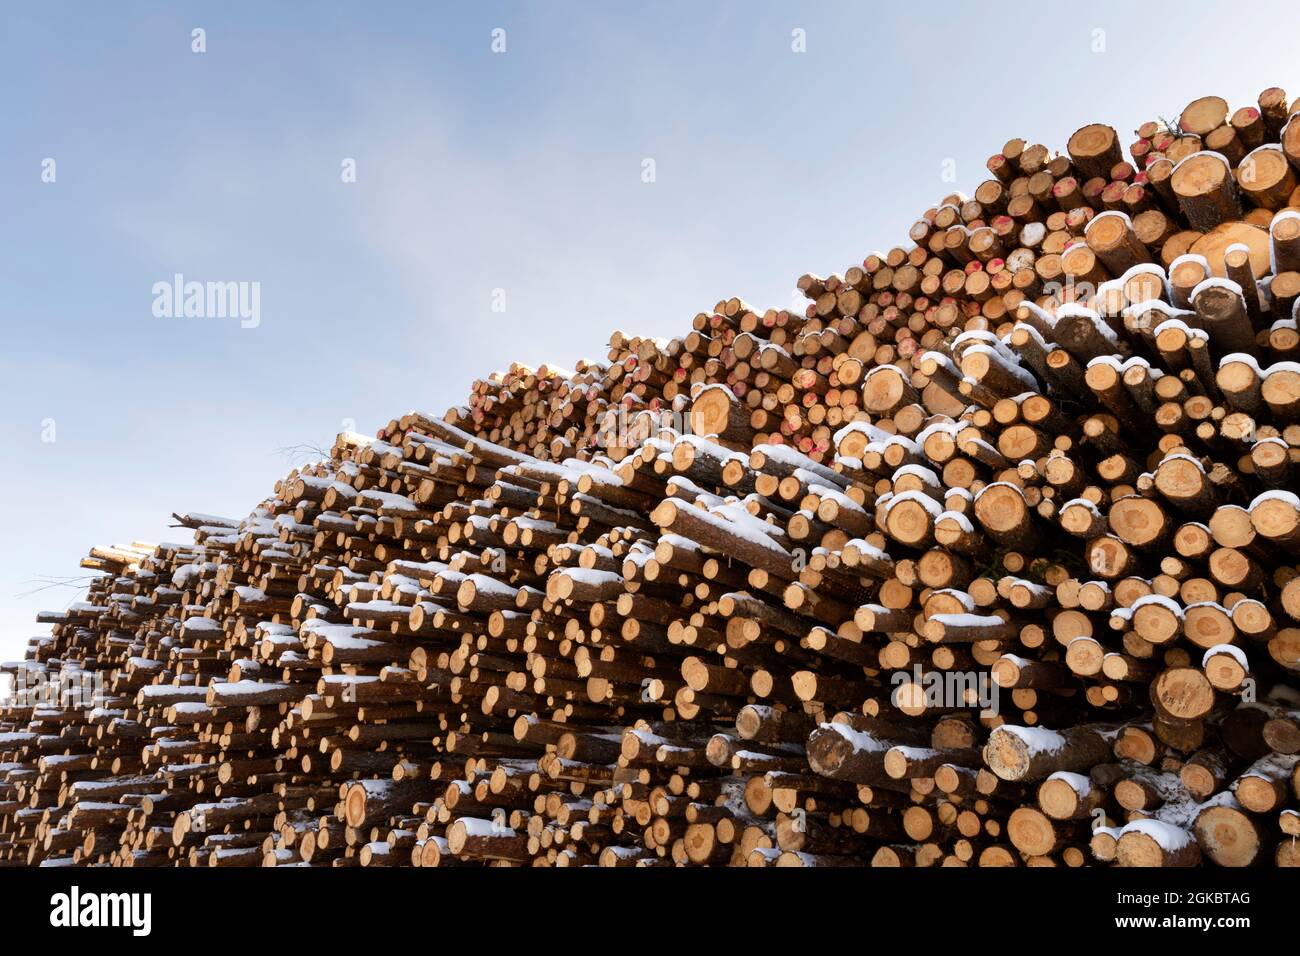 Pile of logged tree trunks. Sawn trees from the forest. Logging timber wood industry. Stock Photo